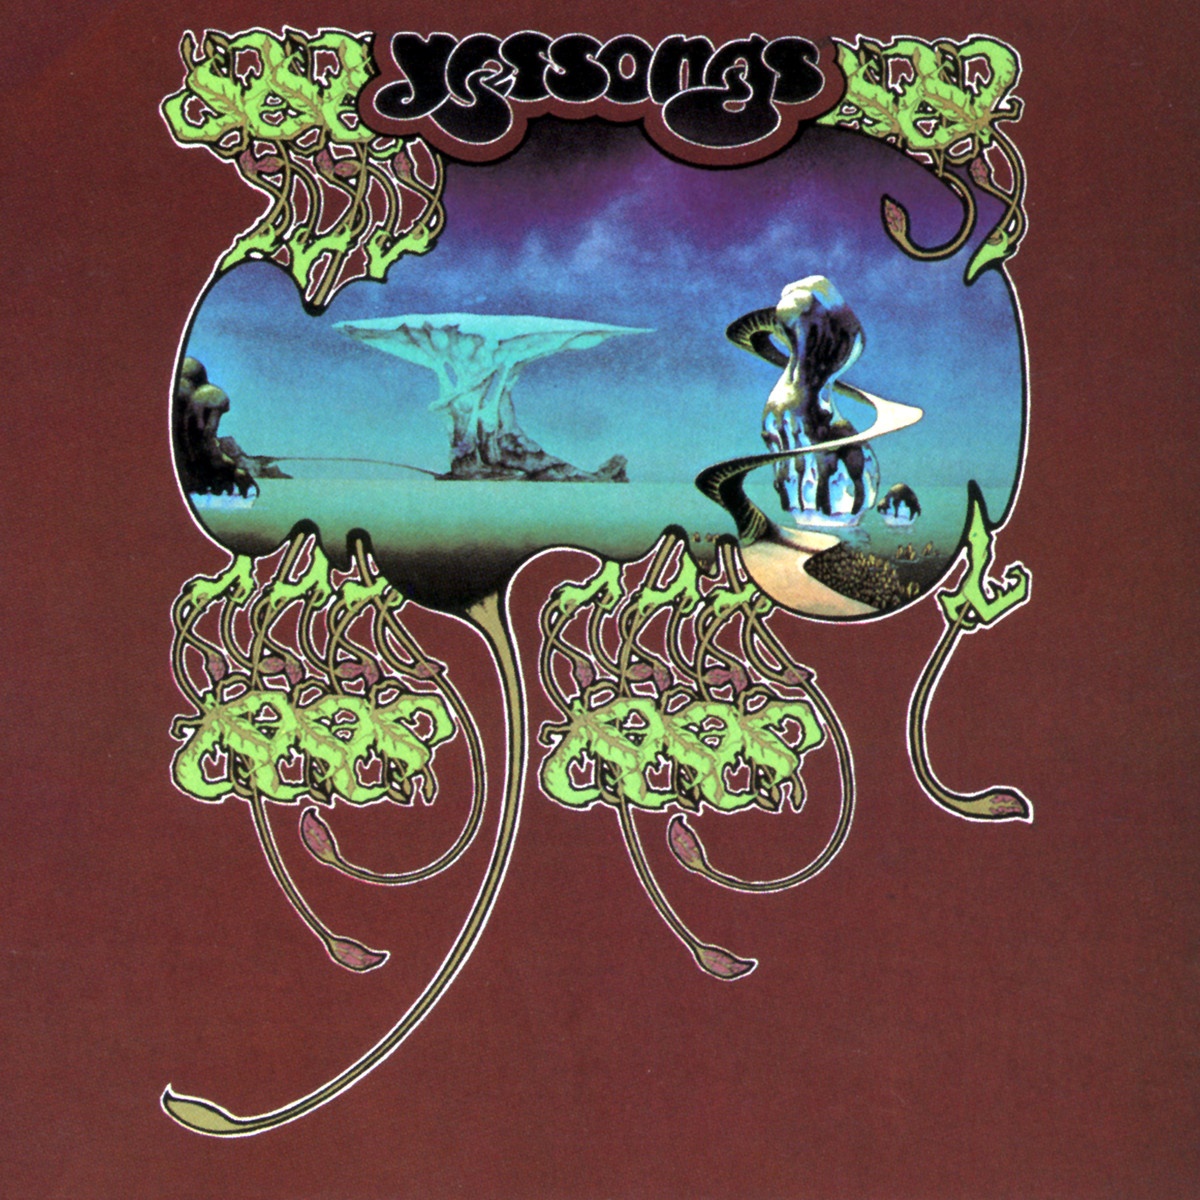 Roundabout (Live LP from Yessongs)